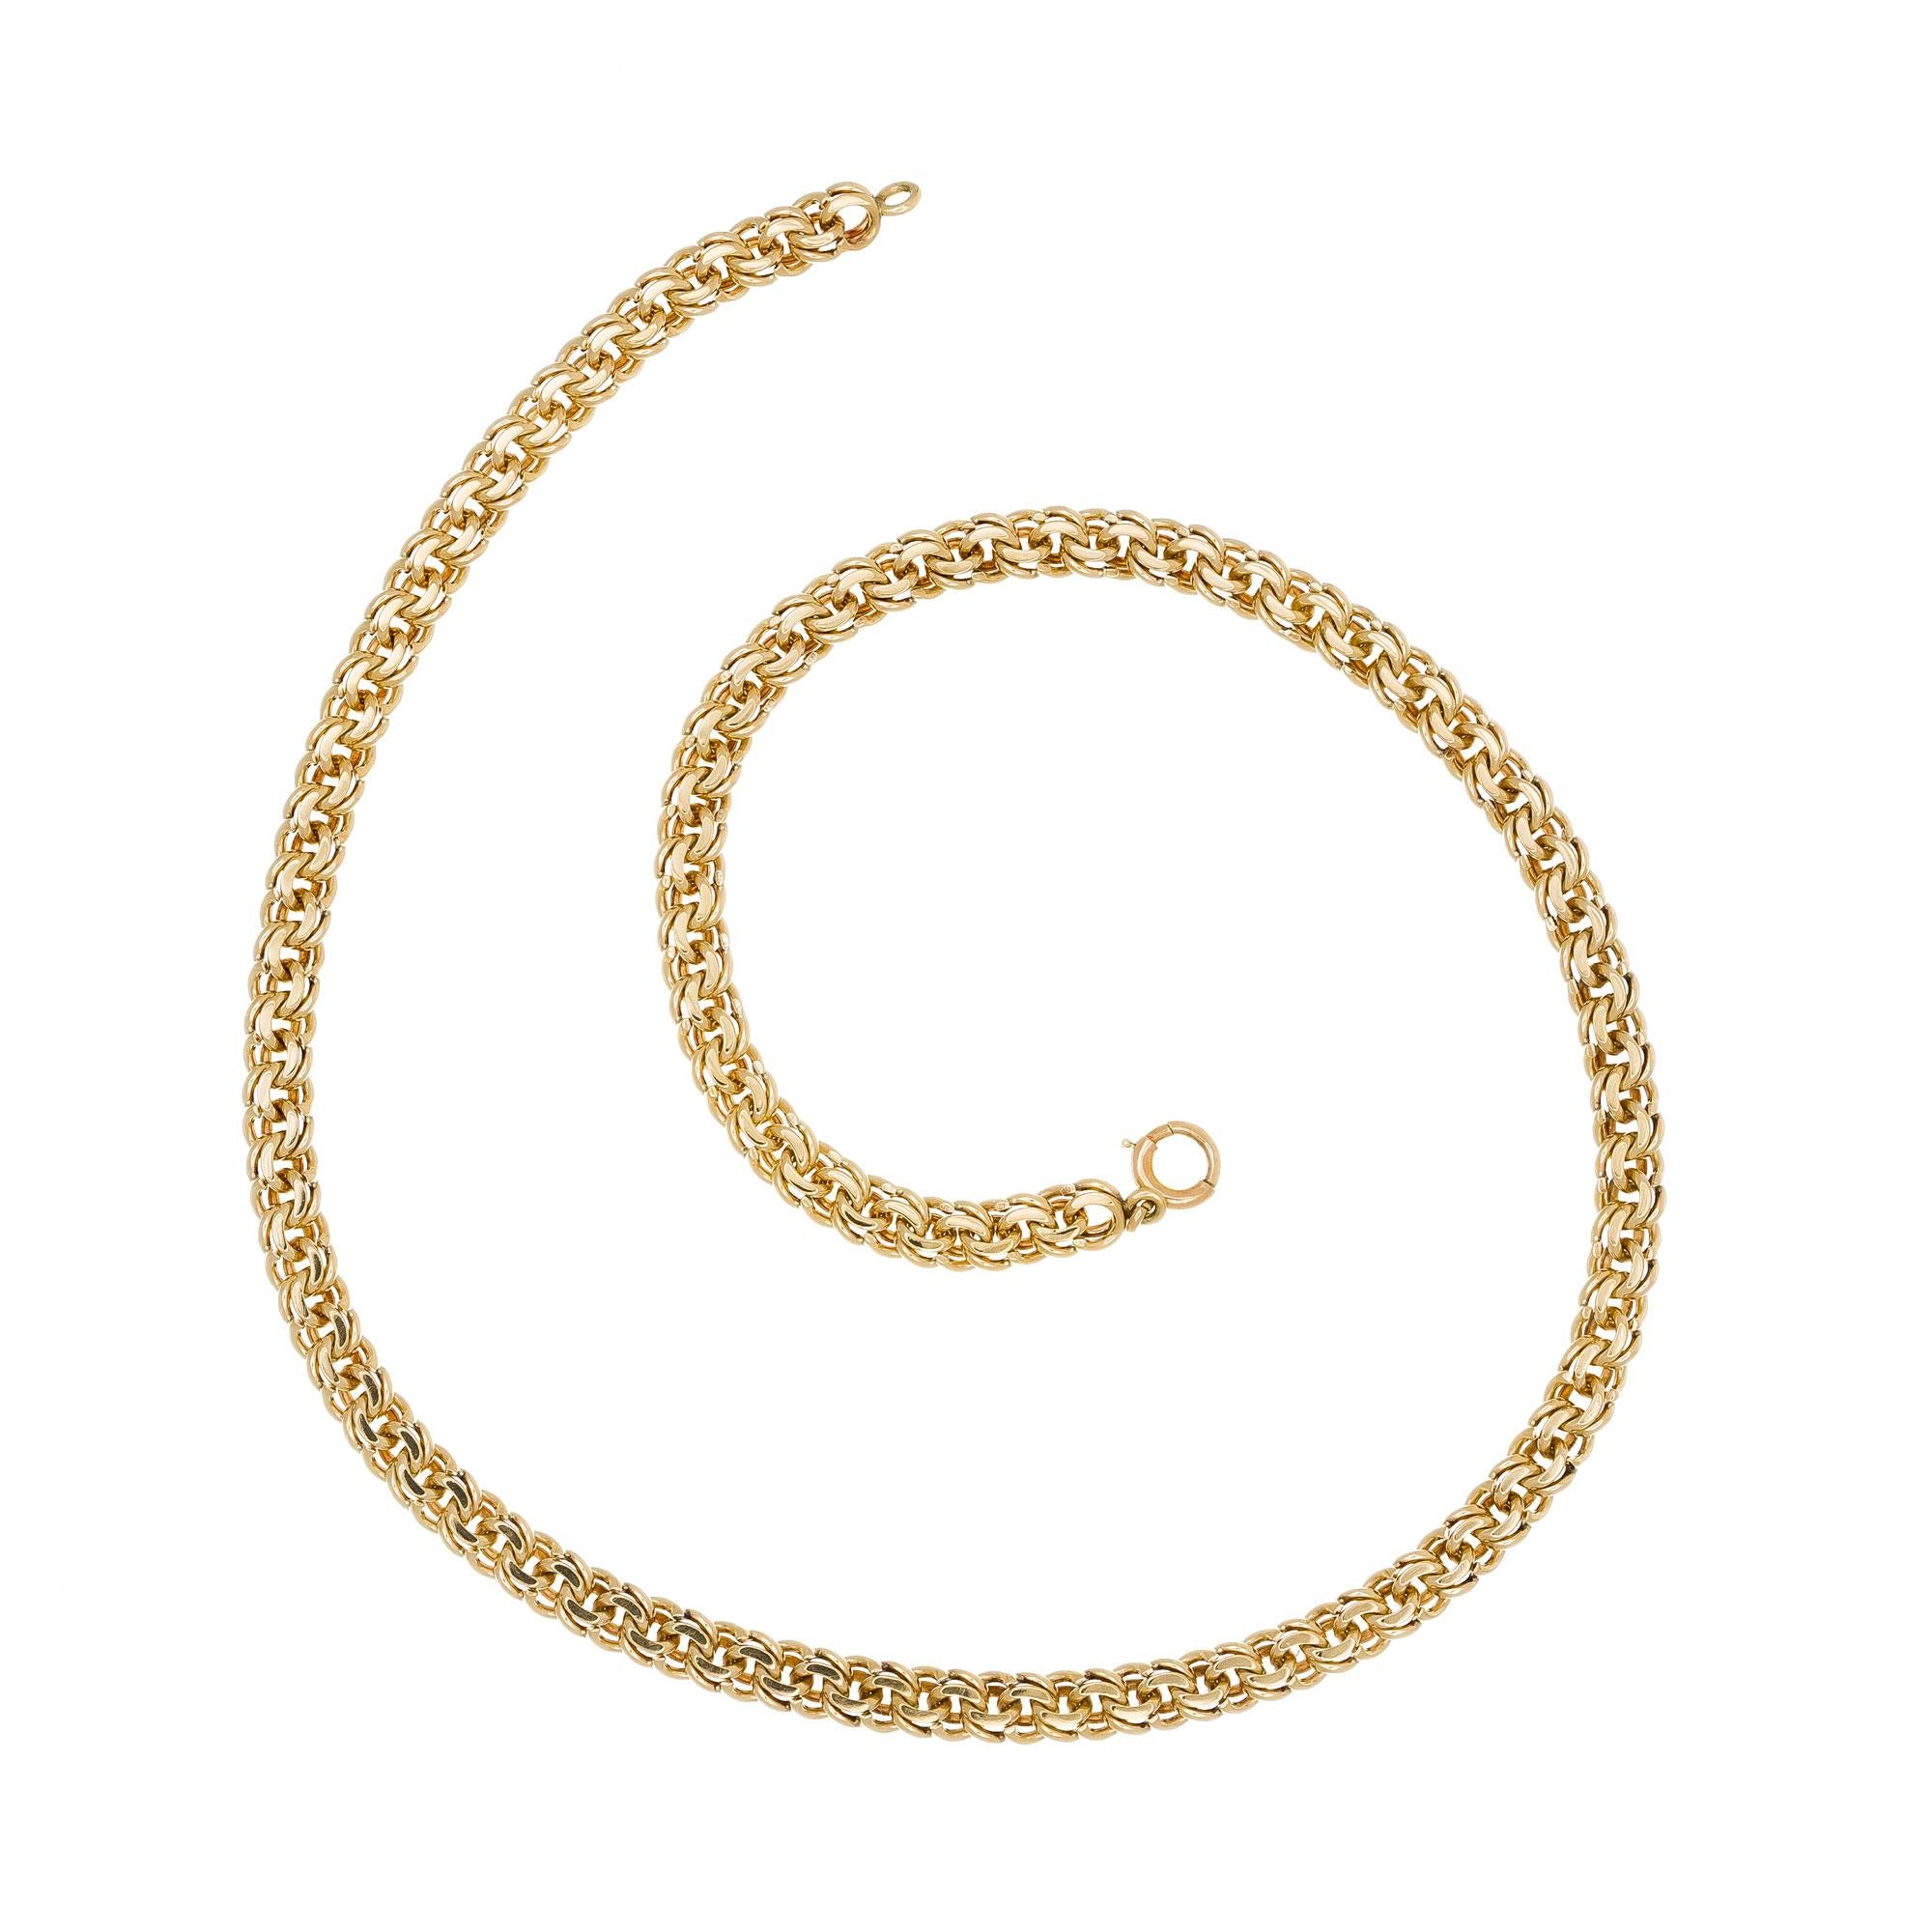 Vintage 194's handmade double spiral link 14k yellow gold necklace. 16 inch necklace.  

14k yellow gold
32.3 grams
Tested and stamped: 14k
Length: 16 inches - Width: 5.61mm - Depth 3.03mm